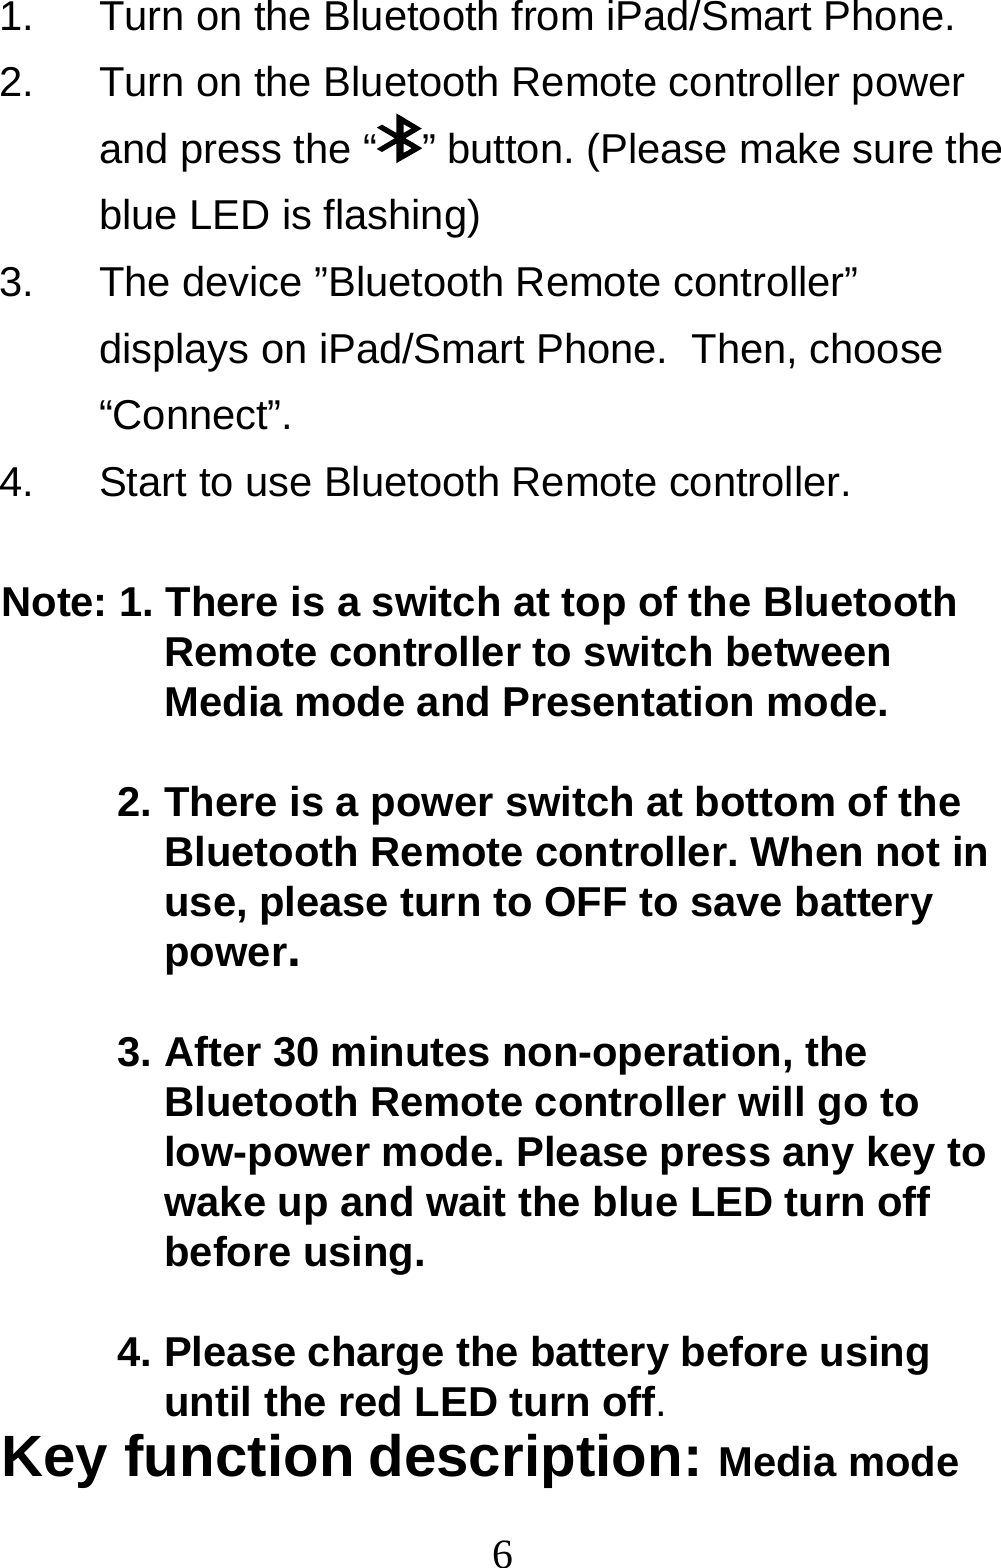  61.  Turn on the Bluetooth from iPad/Smart Phone. 2.  Turn on the Bluetooth Remote controller power and press the “ ” button. (Please make sure the blue LED is flashing) 3.  The device ”Bluetooth Remote controller” displays on iPad/Smart Phone.  Then, choose “Connect”. 4.  Start to use Bluetooth Remote controller.  Note: 1. There is a switch at top of the Bluetooth Remote controller to switch between Media mode and Presentation mode.  2. There is a power switch at bottom of the Bluetooth Remote controller. When not in use, please turn to OFF to save battery power.  3. After 30 minutes non-operation, the Bluetooth Remote controller will go to low-power mode. Please press any key to wake up and wait the blue LED turn off before using.  4. Please charge the battery before using until the red LED turn off. Key function description: Media mode 